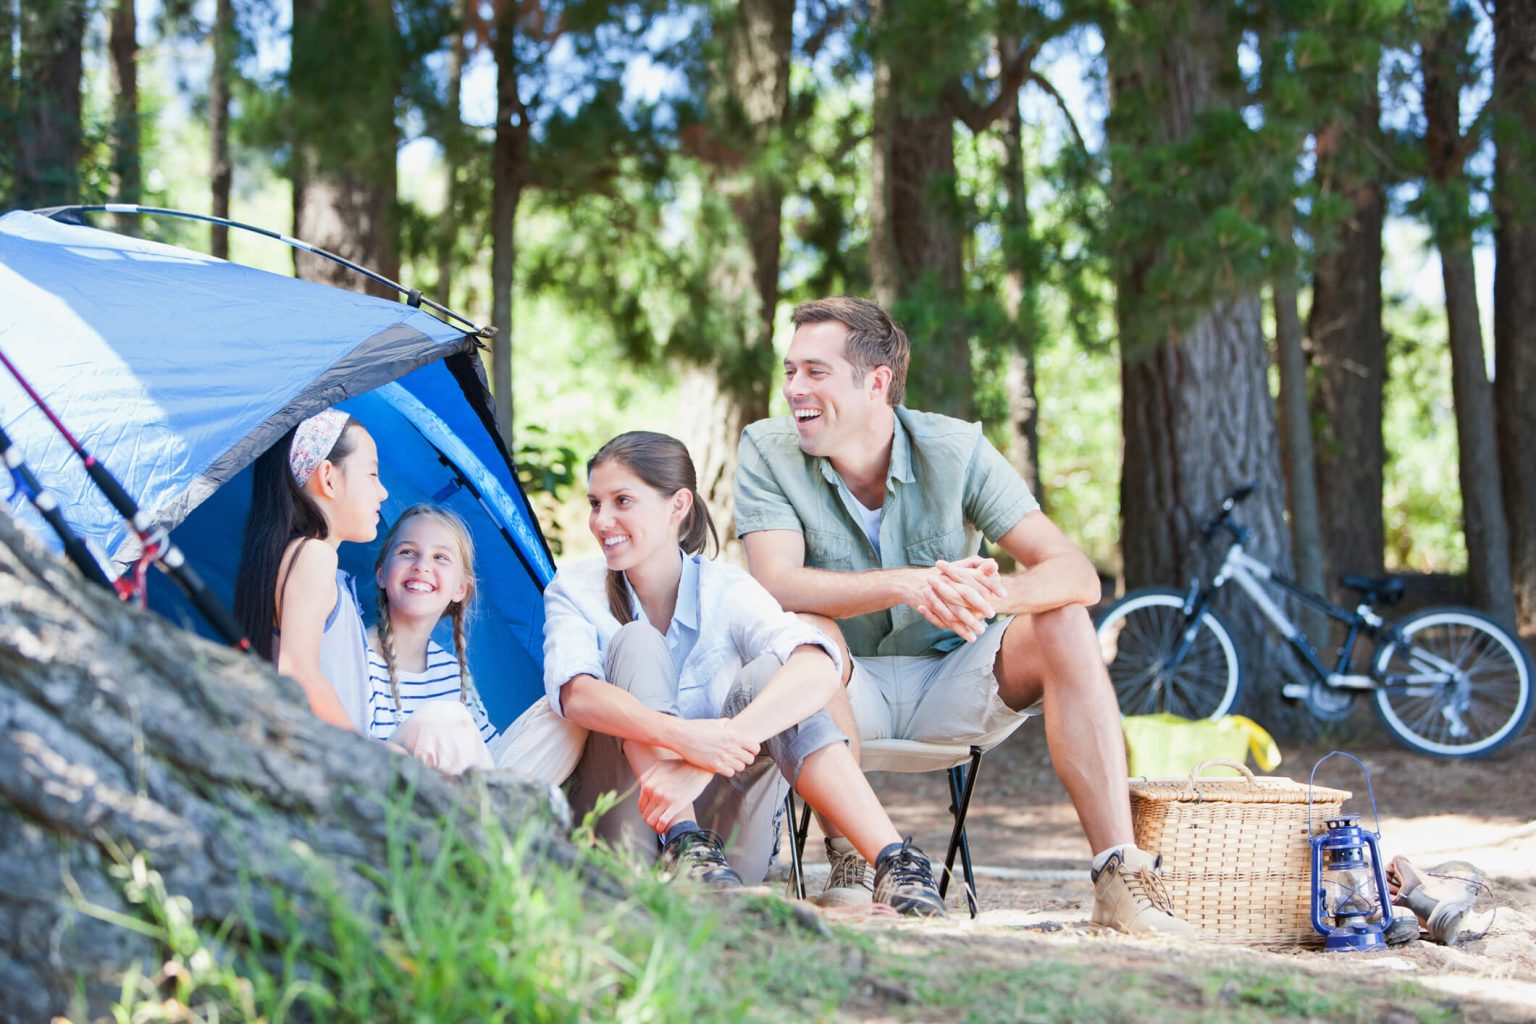 A family camping, sitting in front of a blue tent.